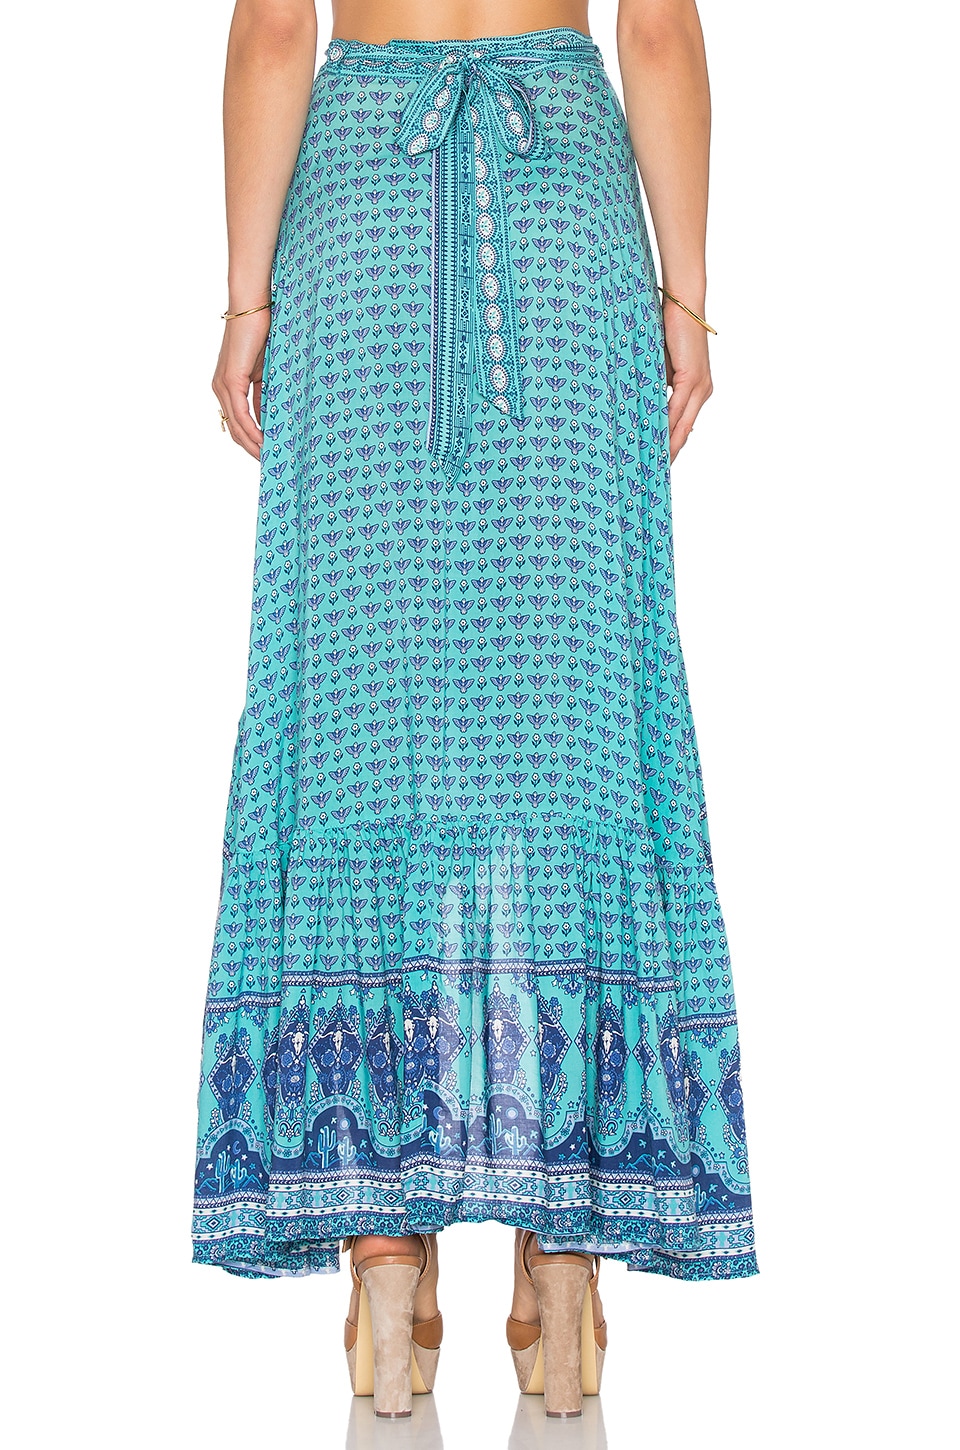 Spell & The Gypsy Collective Sunset Road Wrap Skirt in Aqua | REVOLVE